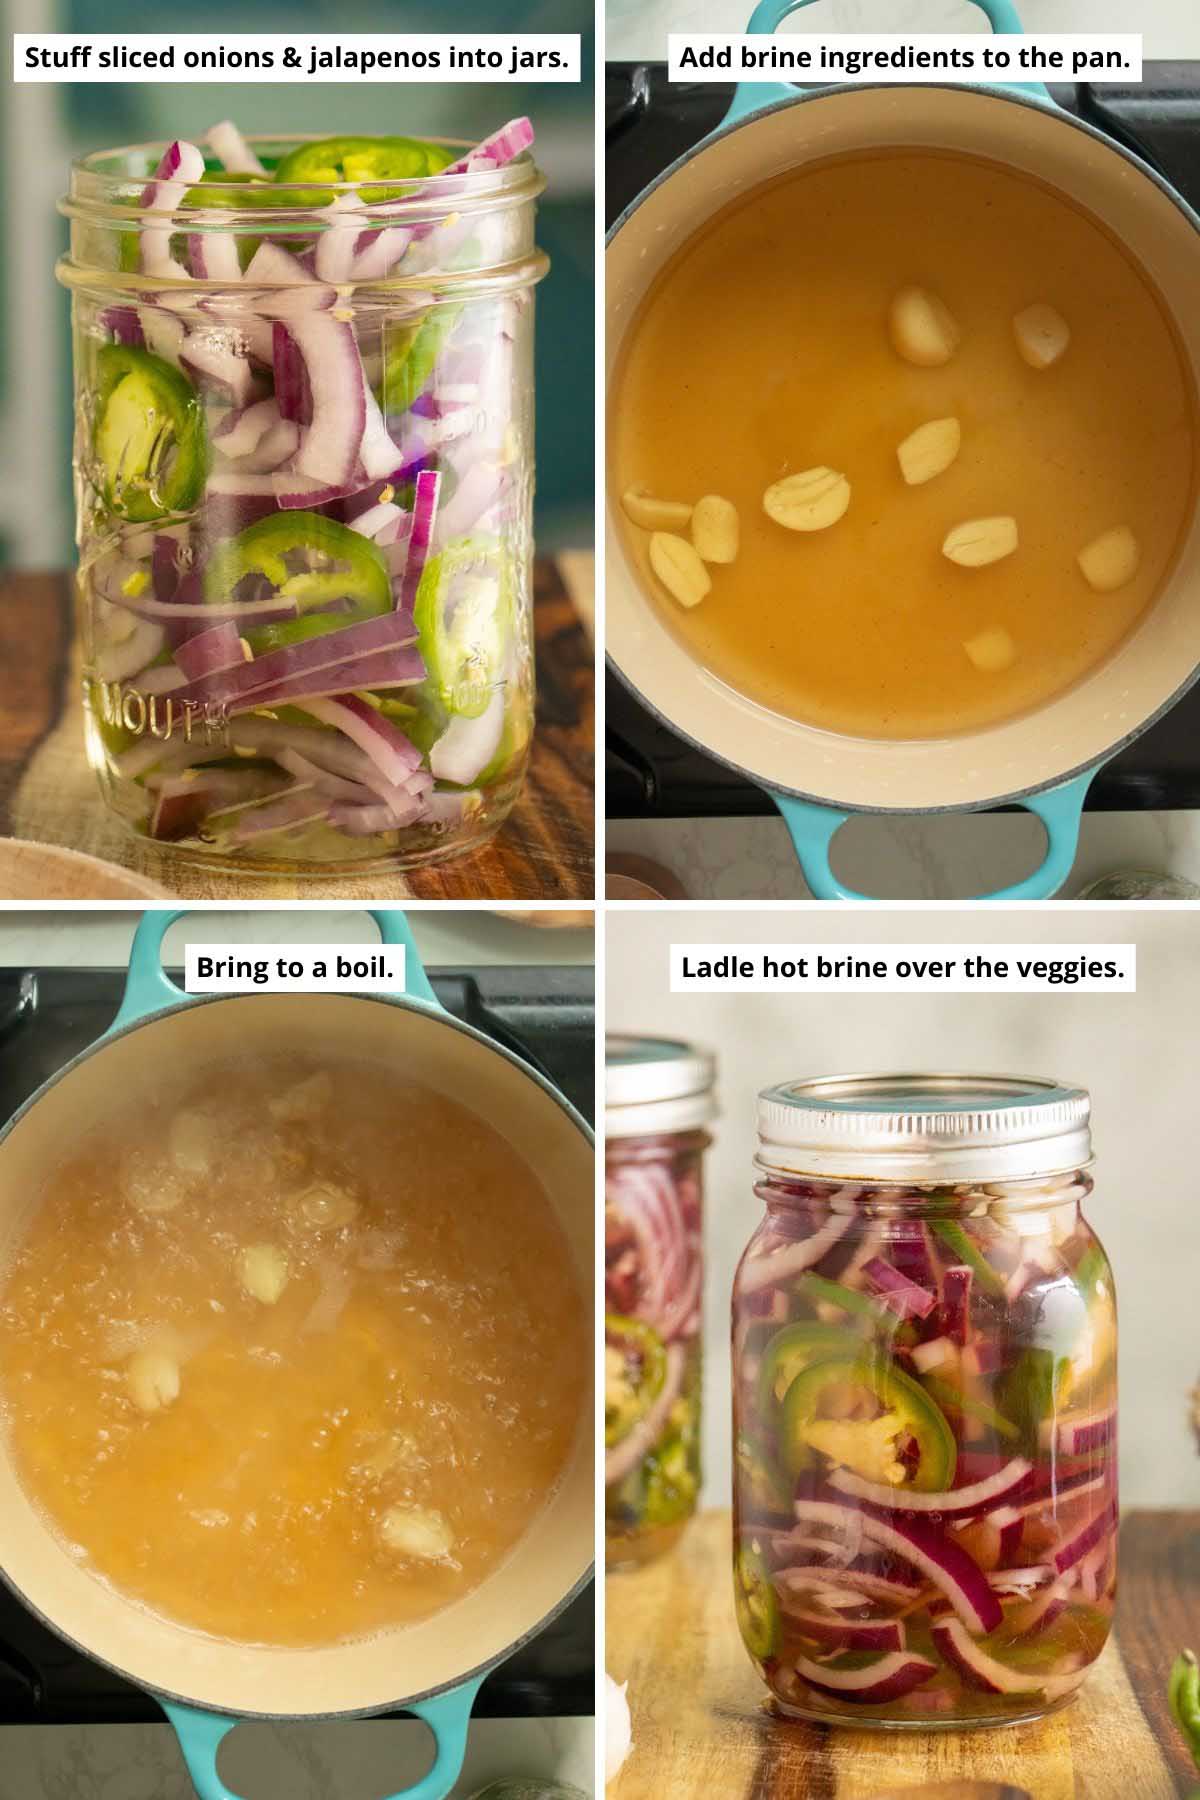 image collage showing red onions and jalapenos stuffed into jars, the brine in the saucepan before and after boiling, and the jars after pouring the brine over them